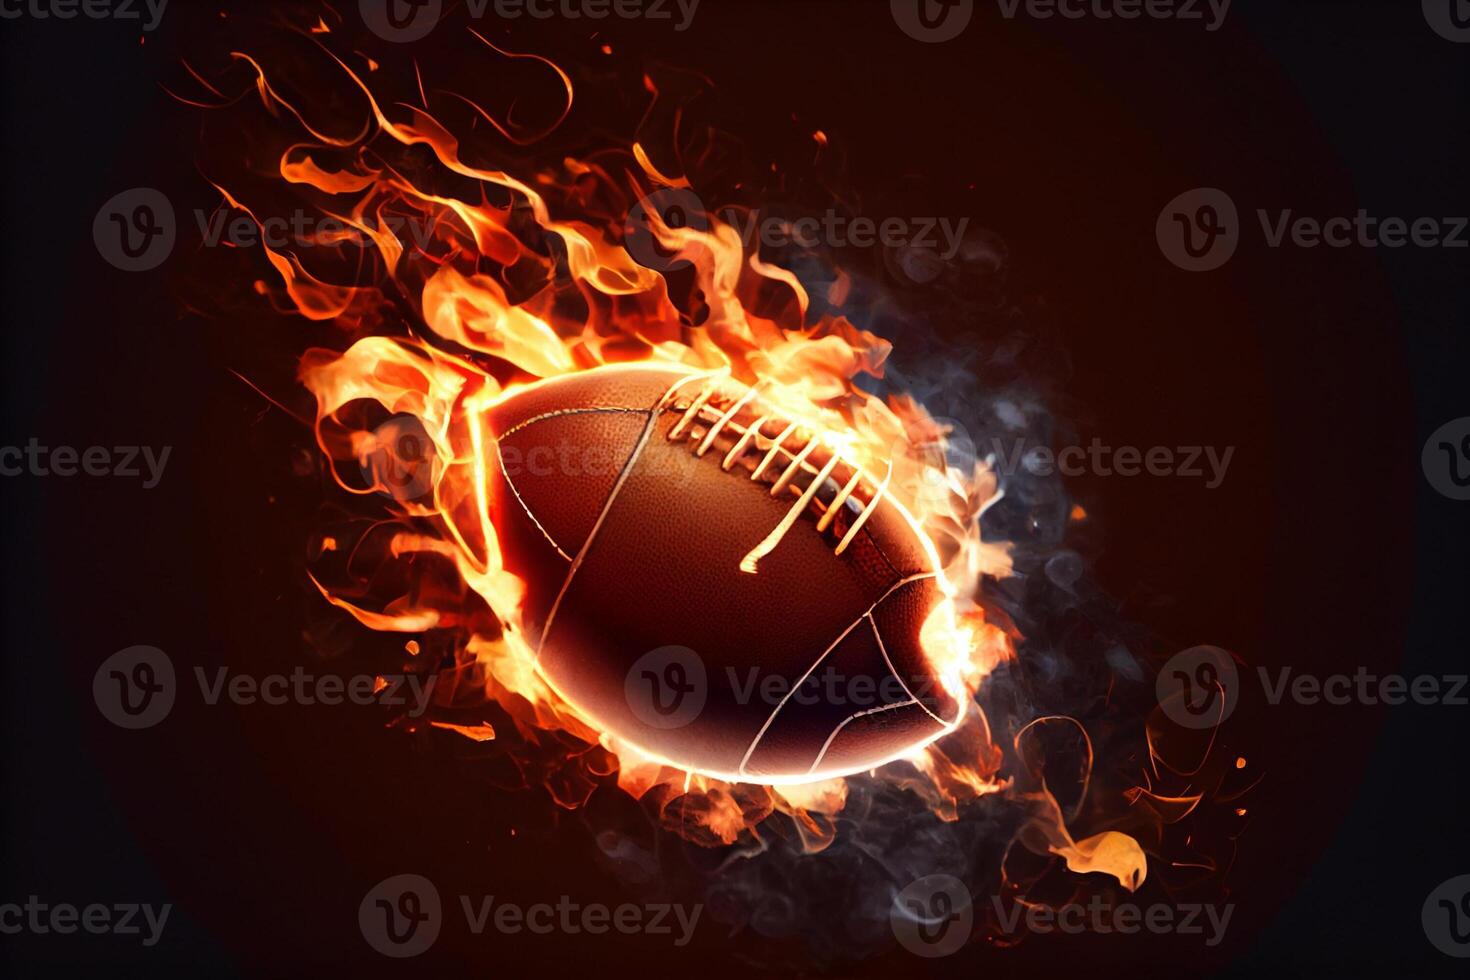 The ball for American football, flies in fire, on a bright background. photo